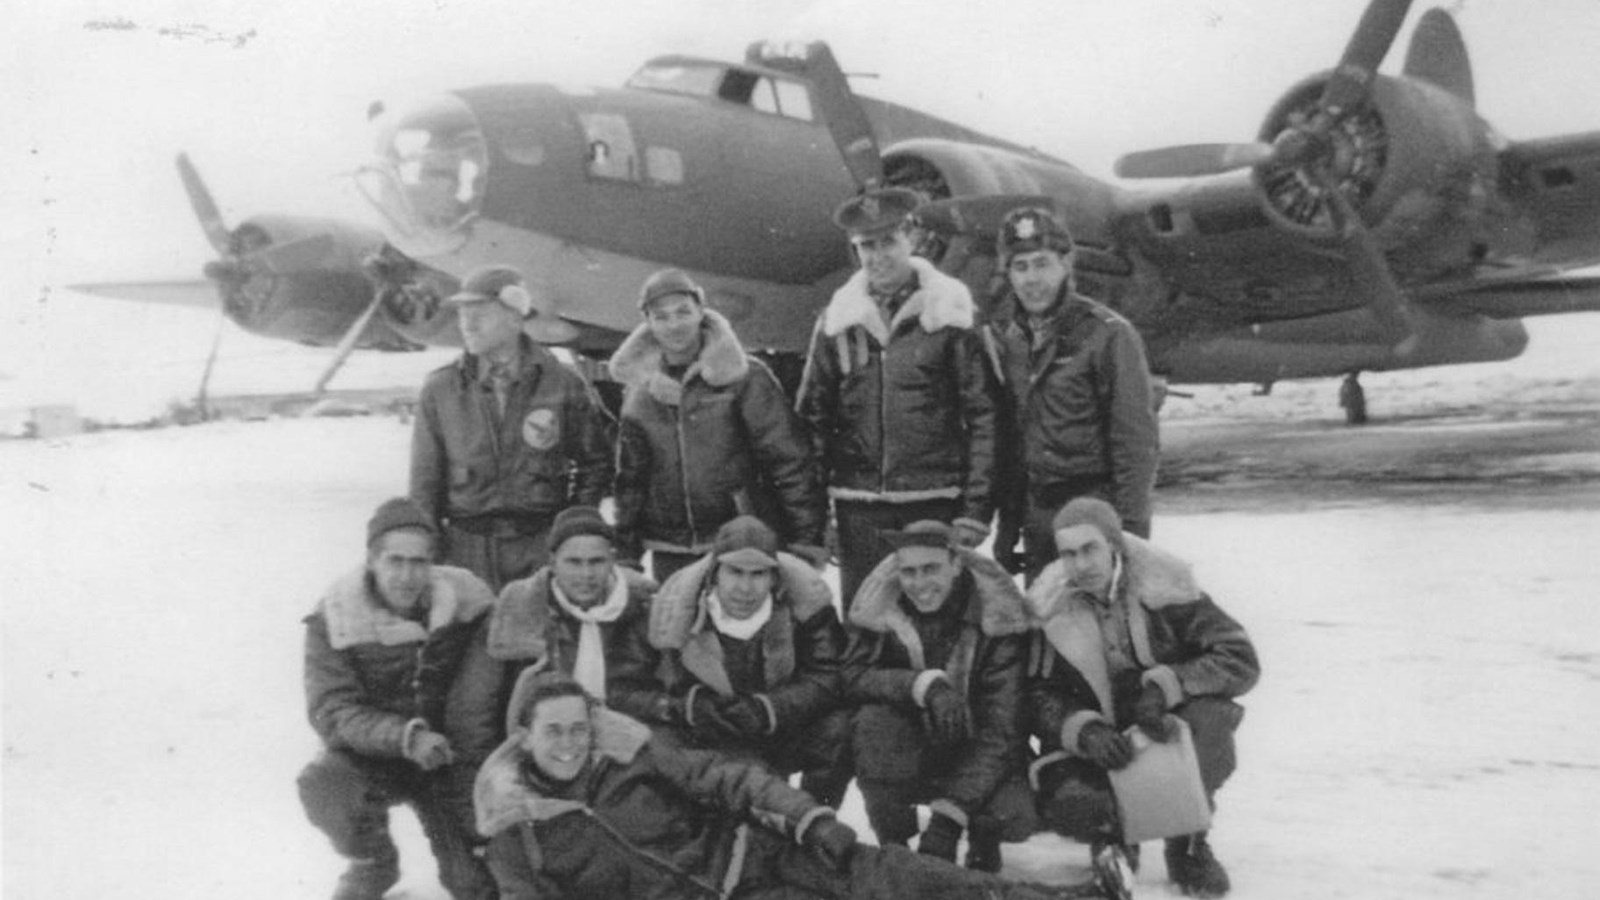 10 men in winter clothing in front of B-17 Bomber aircraft